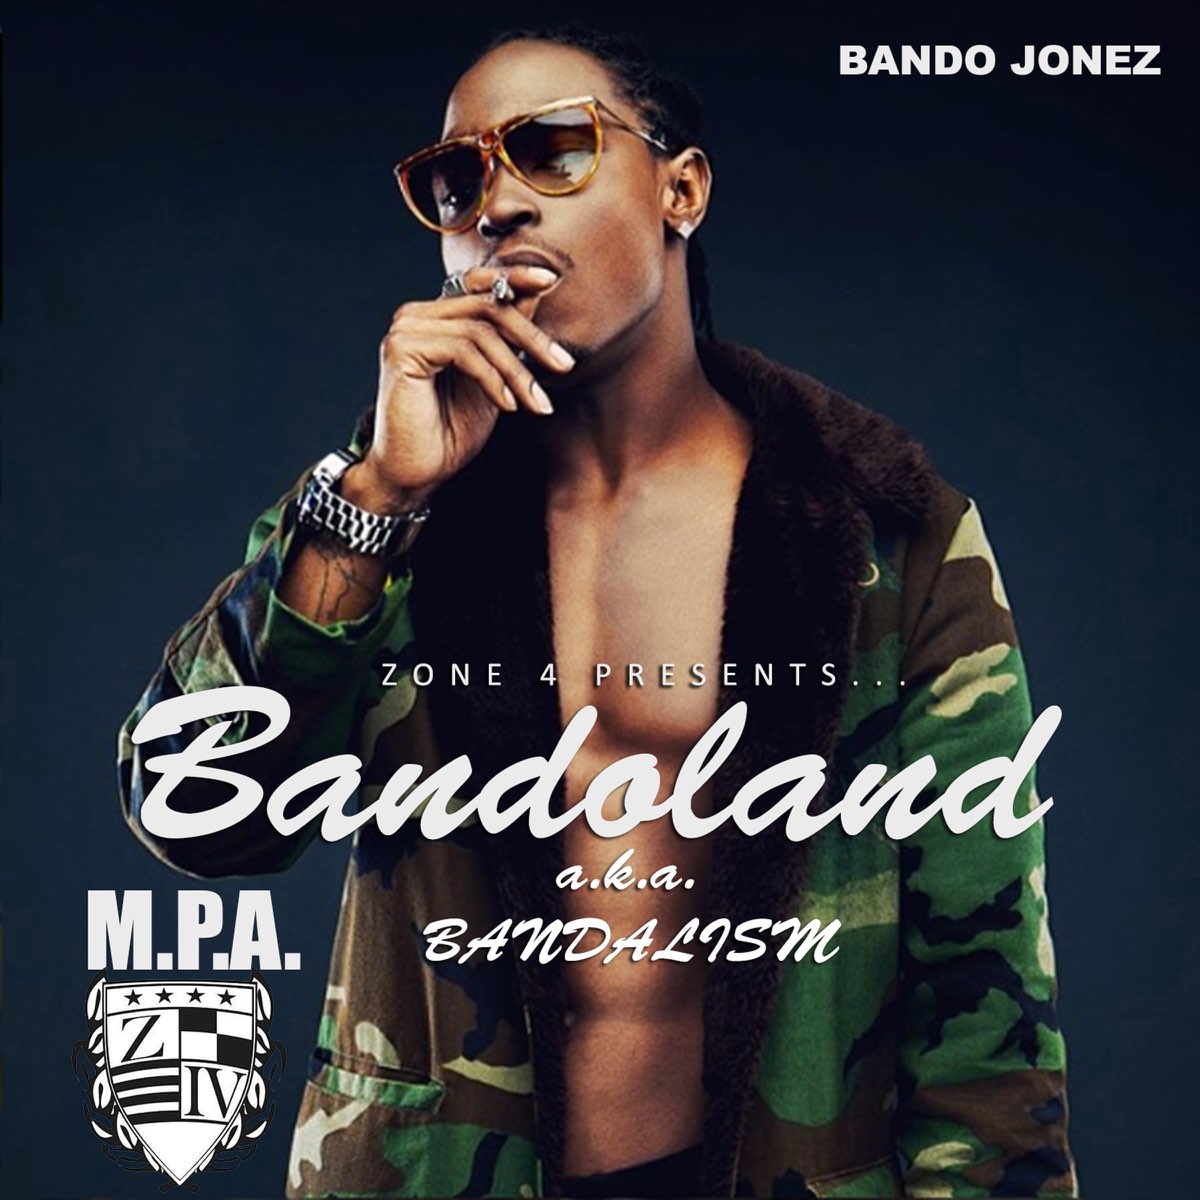 Bando Jonez - 'Say Yes' [Official Ringtone for Android]